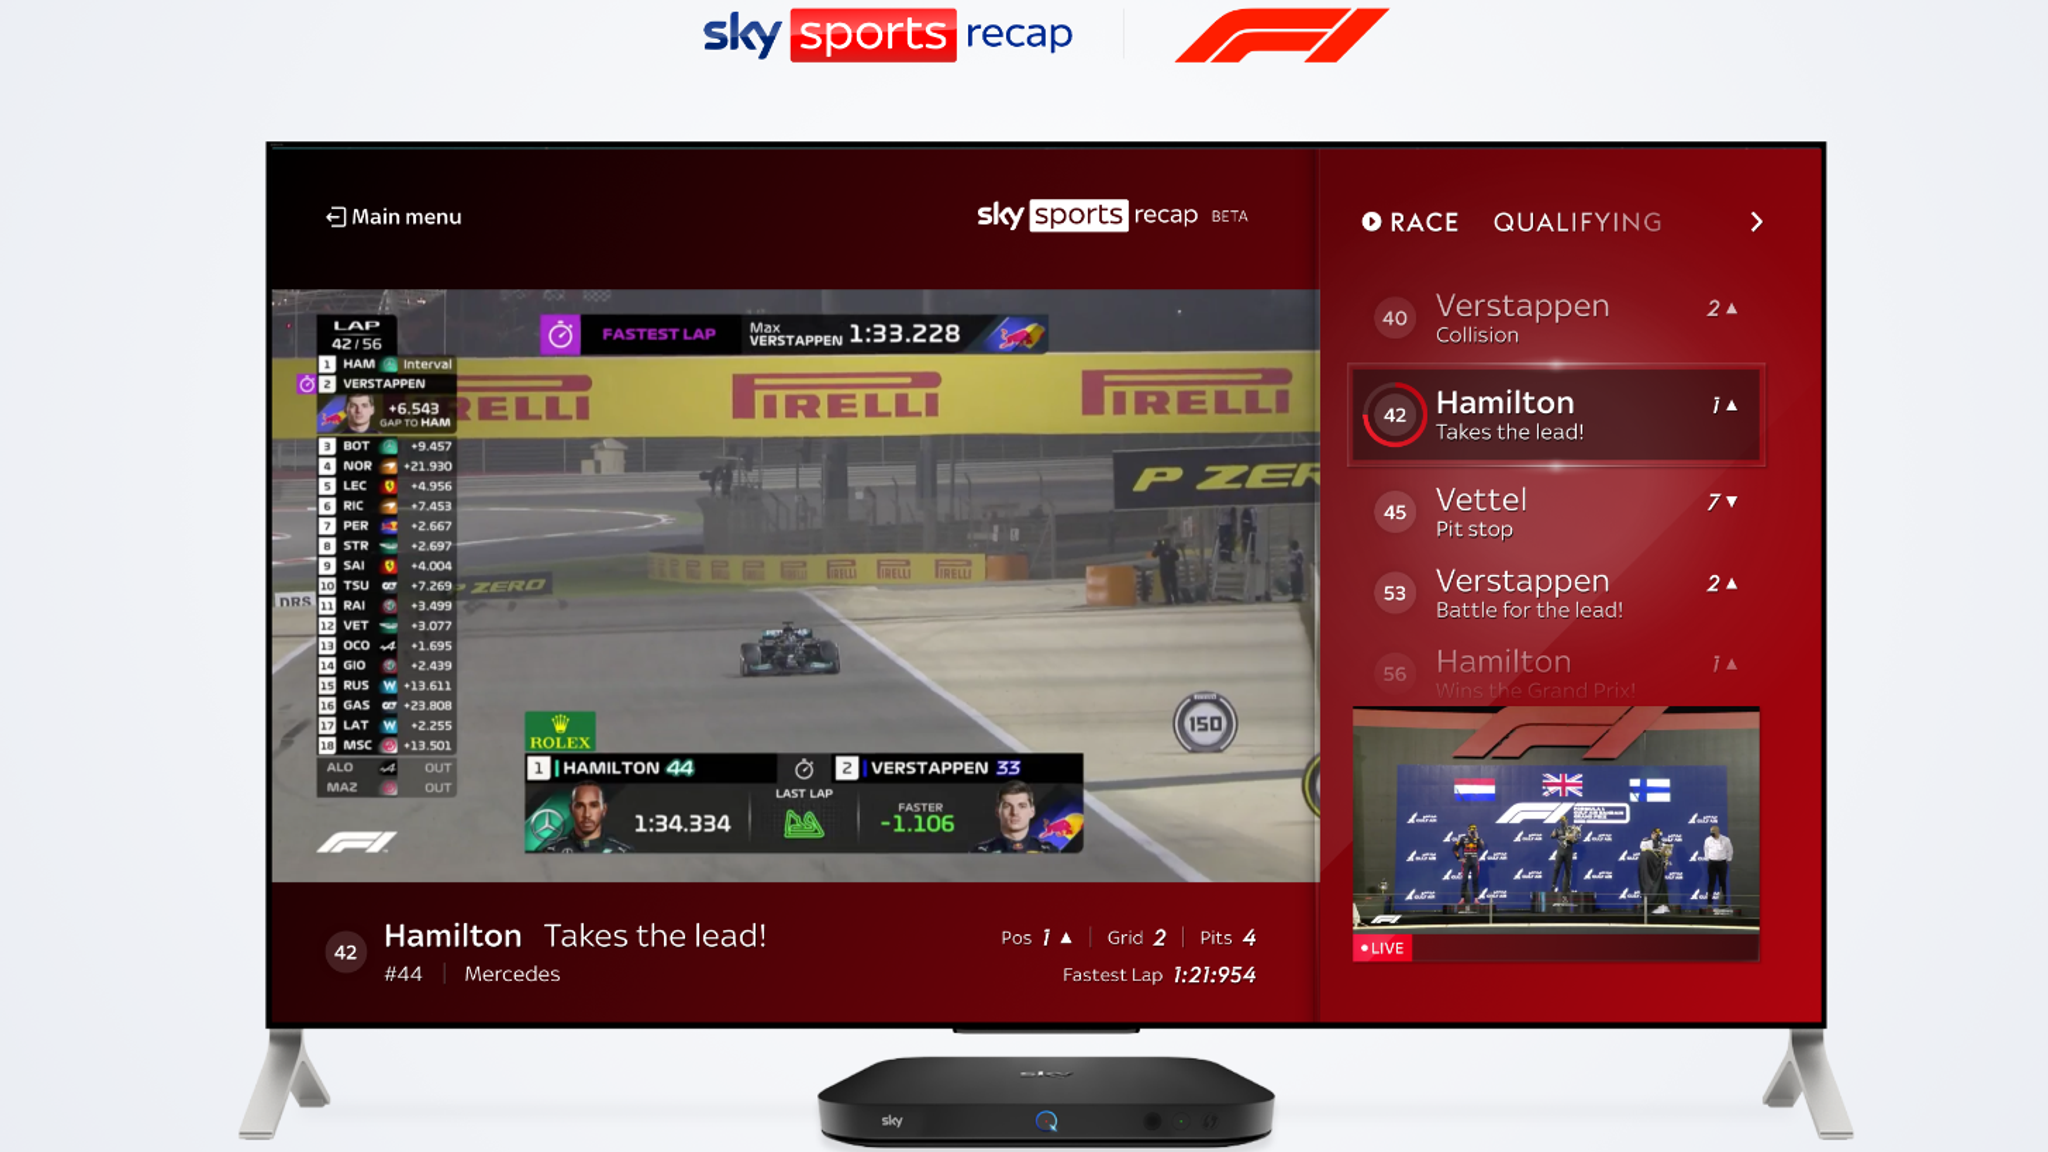 Formula 1 live highlights Sky Sports Recap on Sky Q, never miss a moment of the big action F1 News